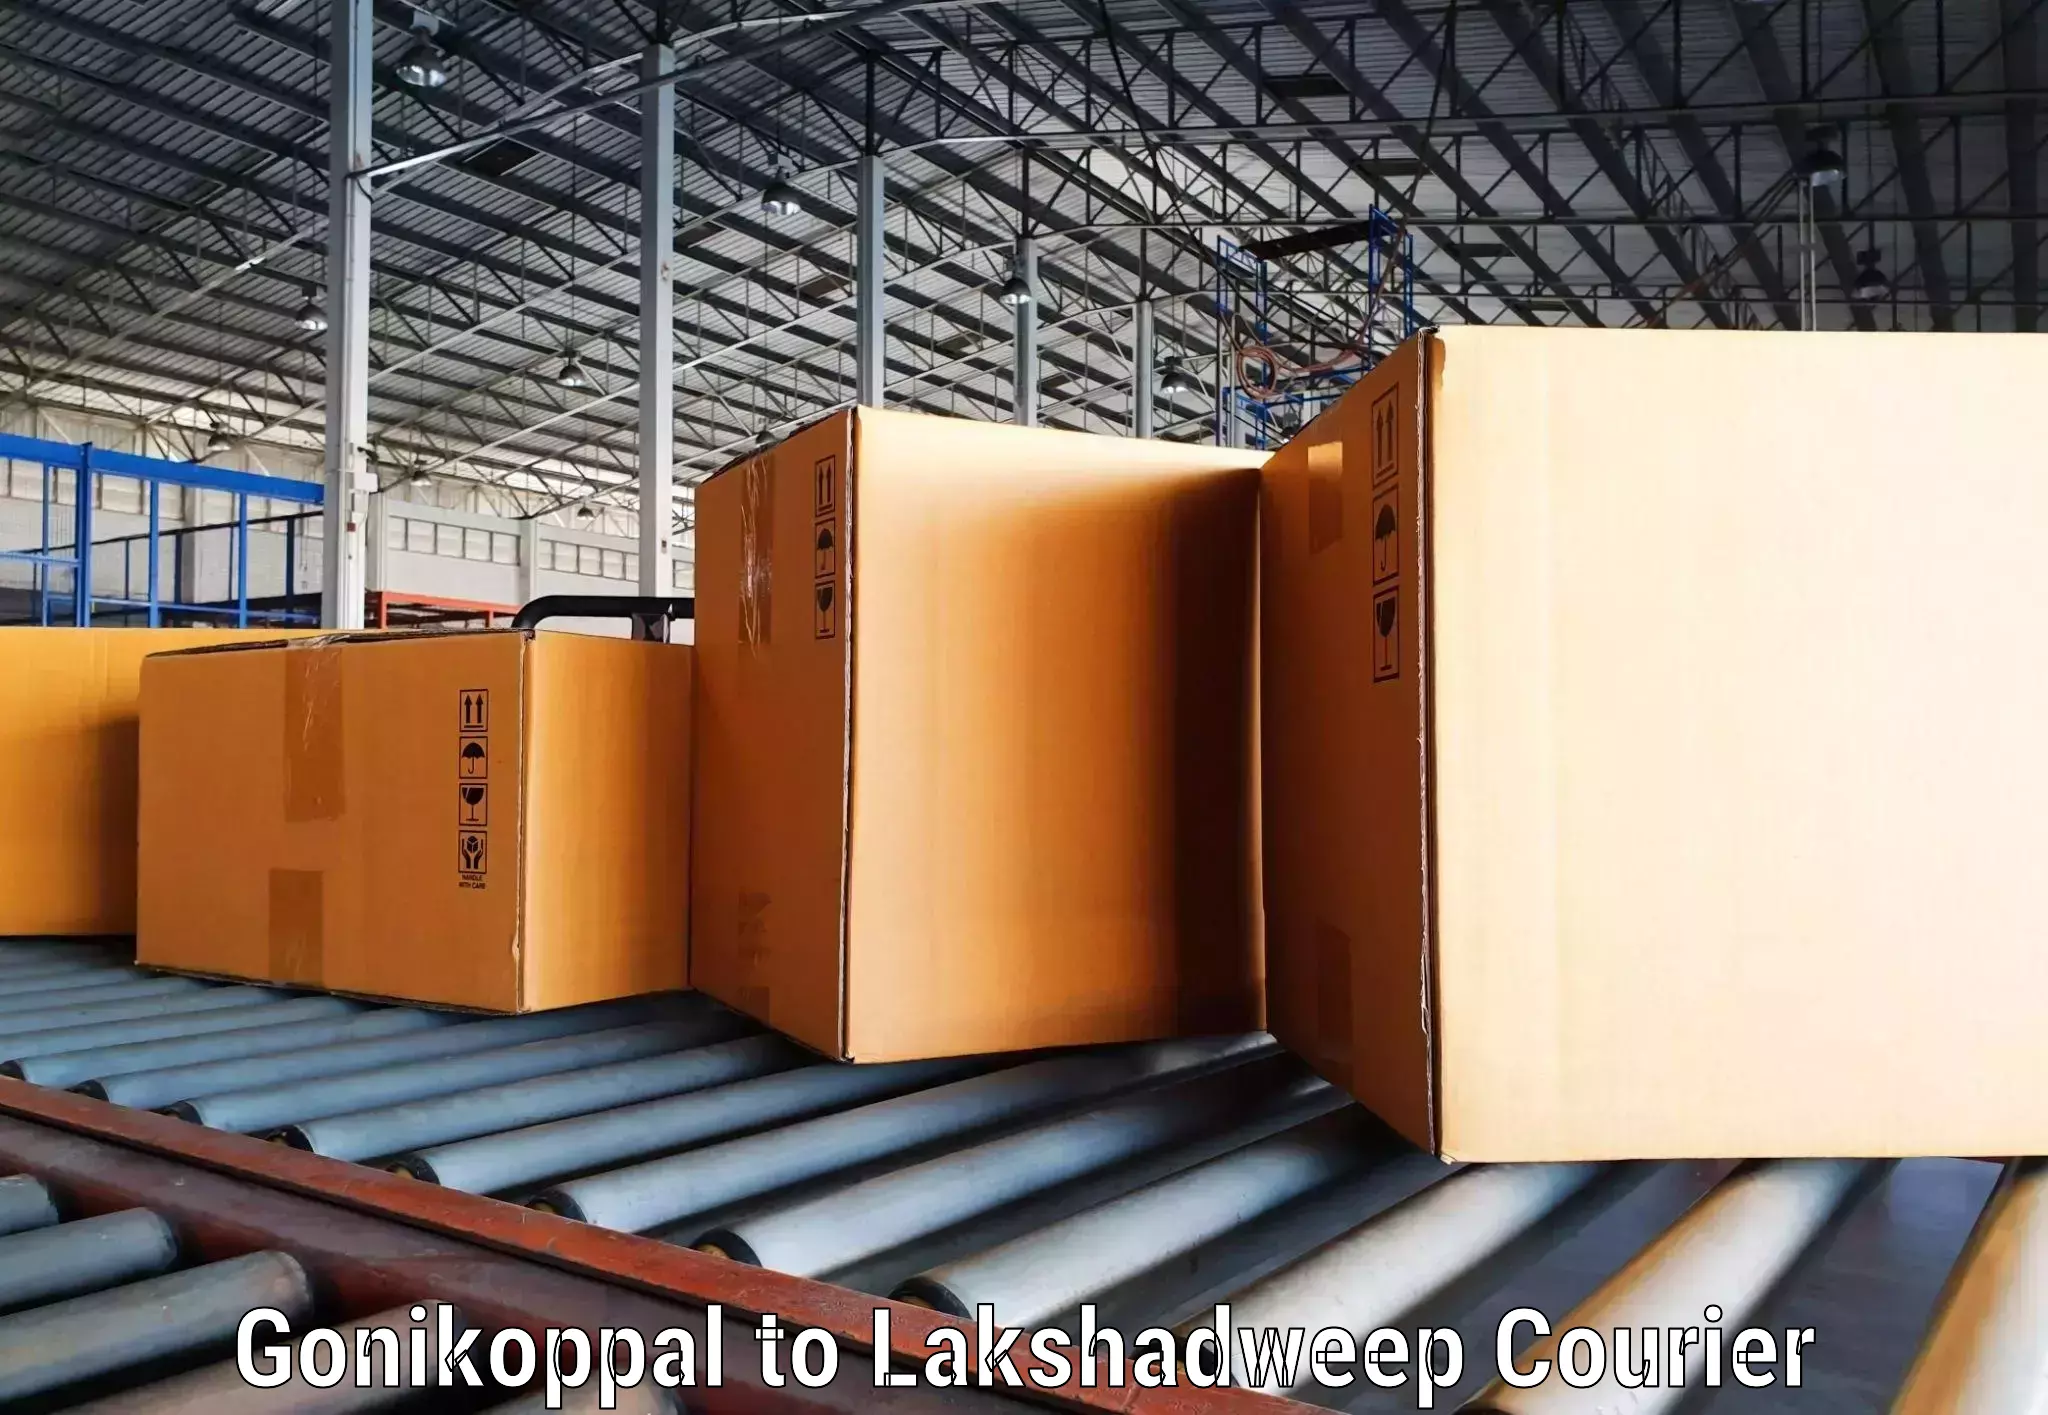 Enhanced tracking features Gonikoppal to Lakshadweep